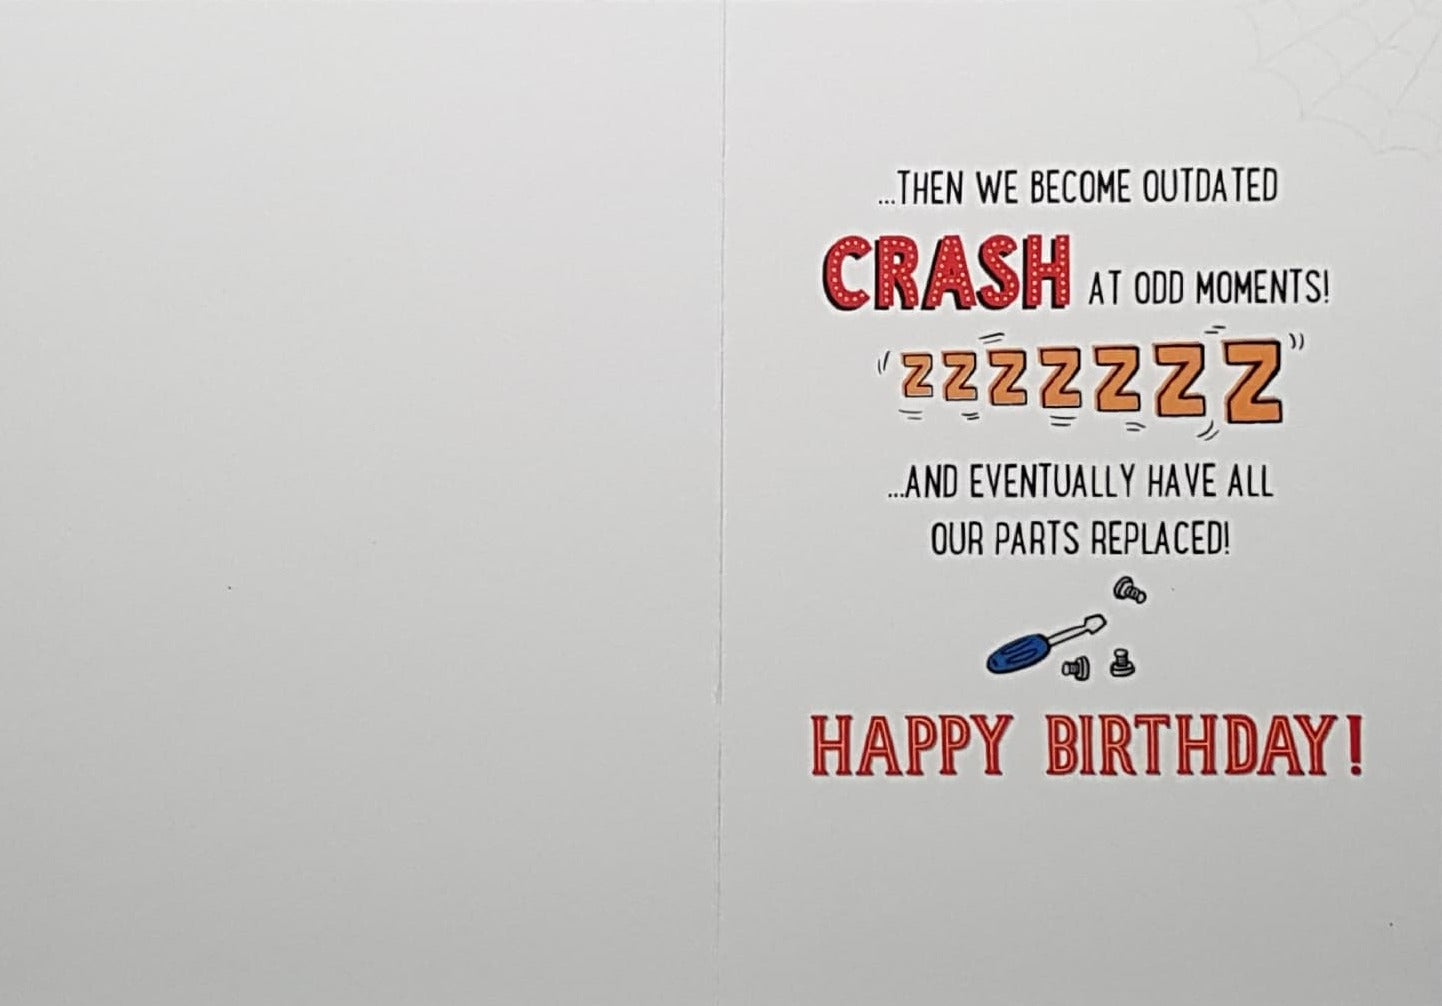 Birthday Card - We Start Out Like Computers, Then Become Outdated... (Humour)